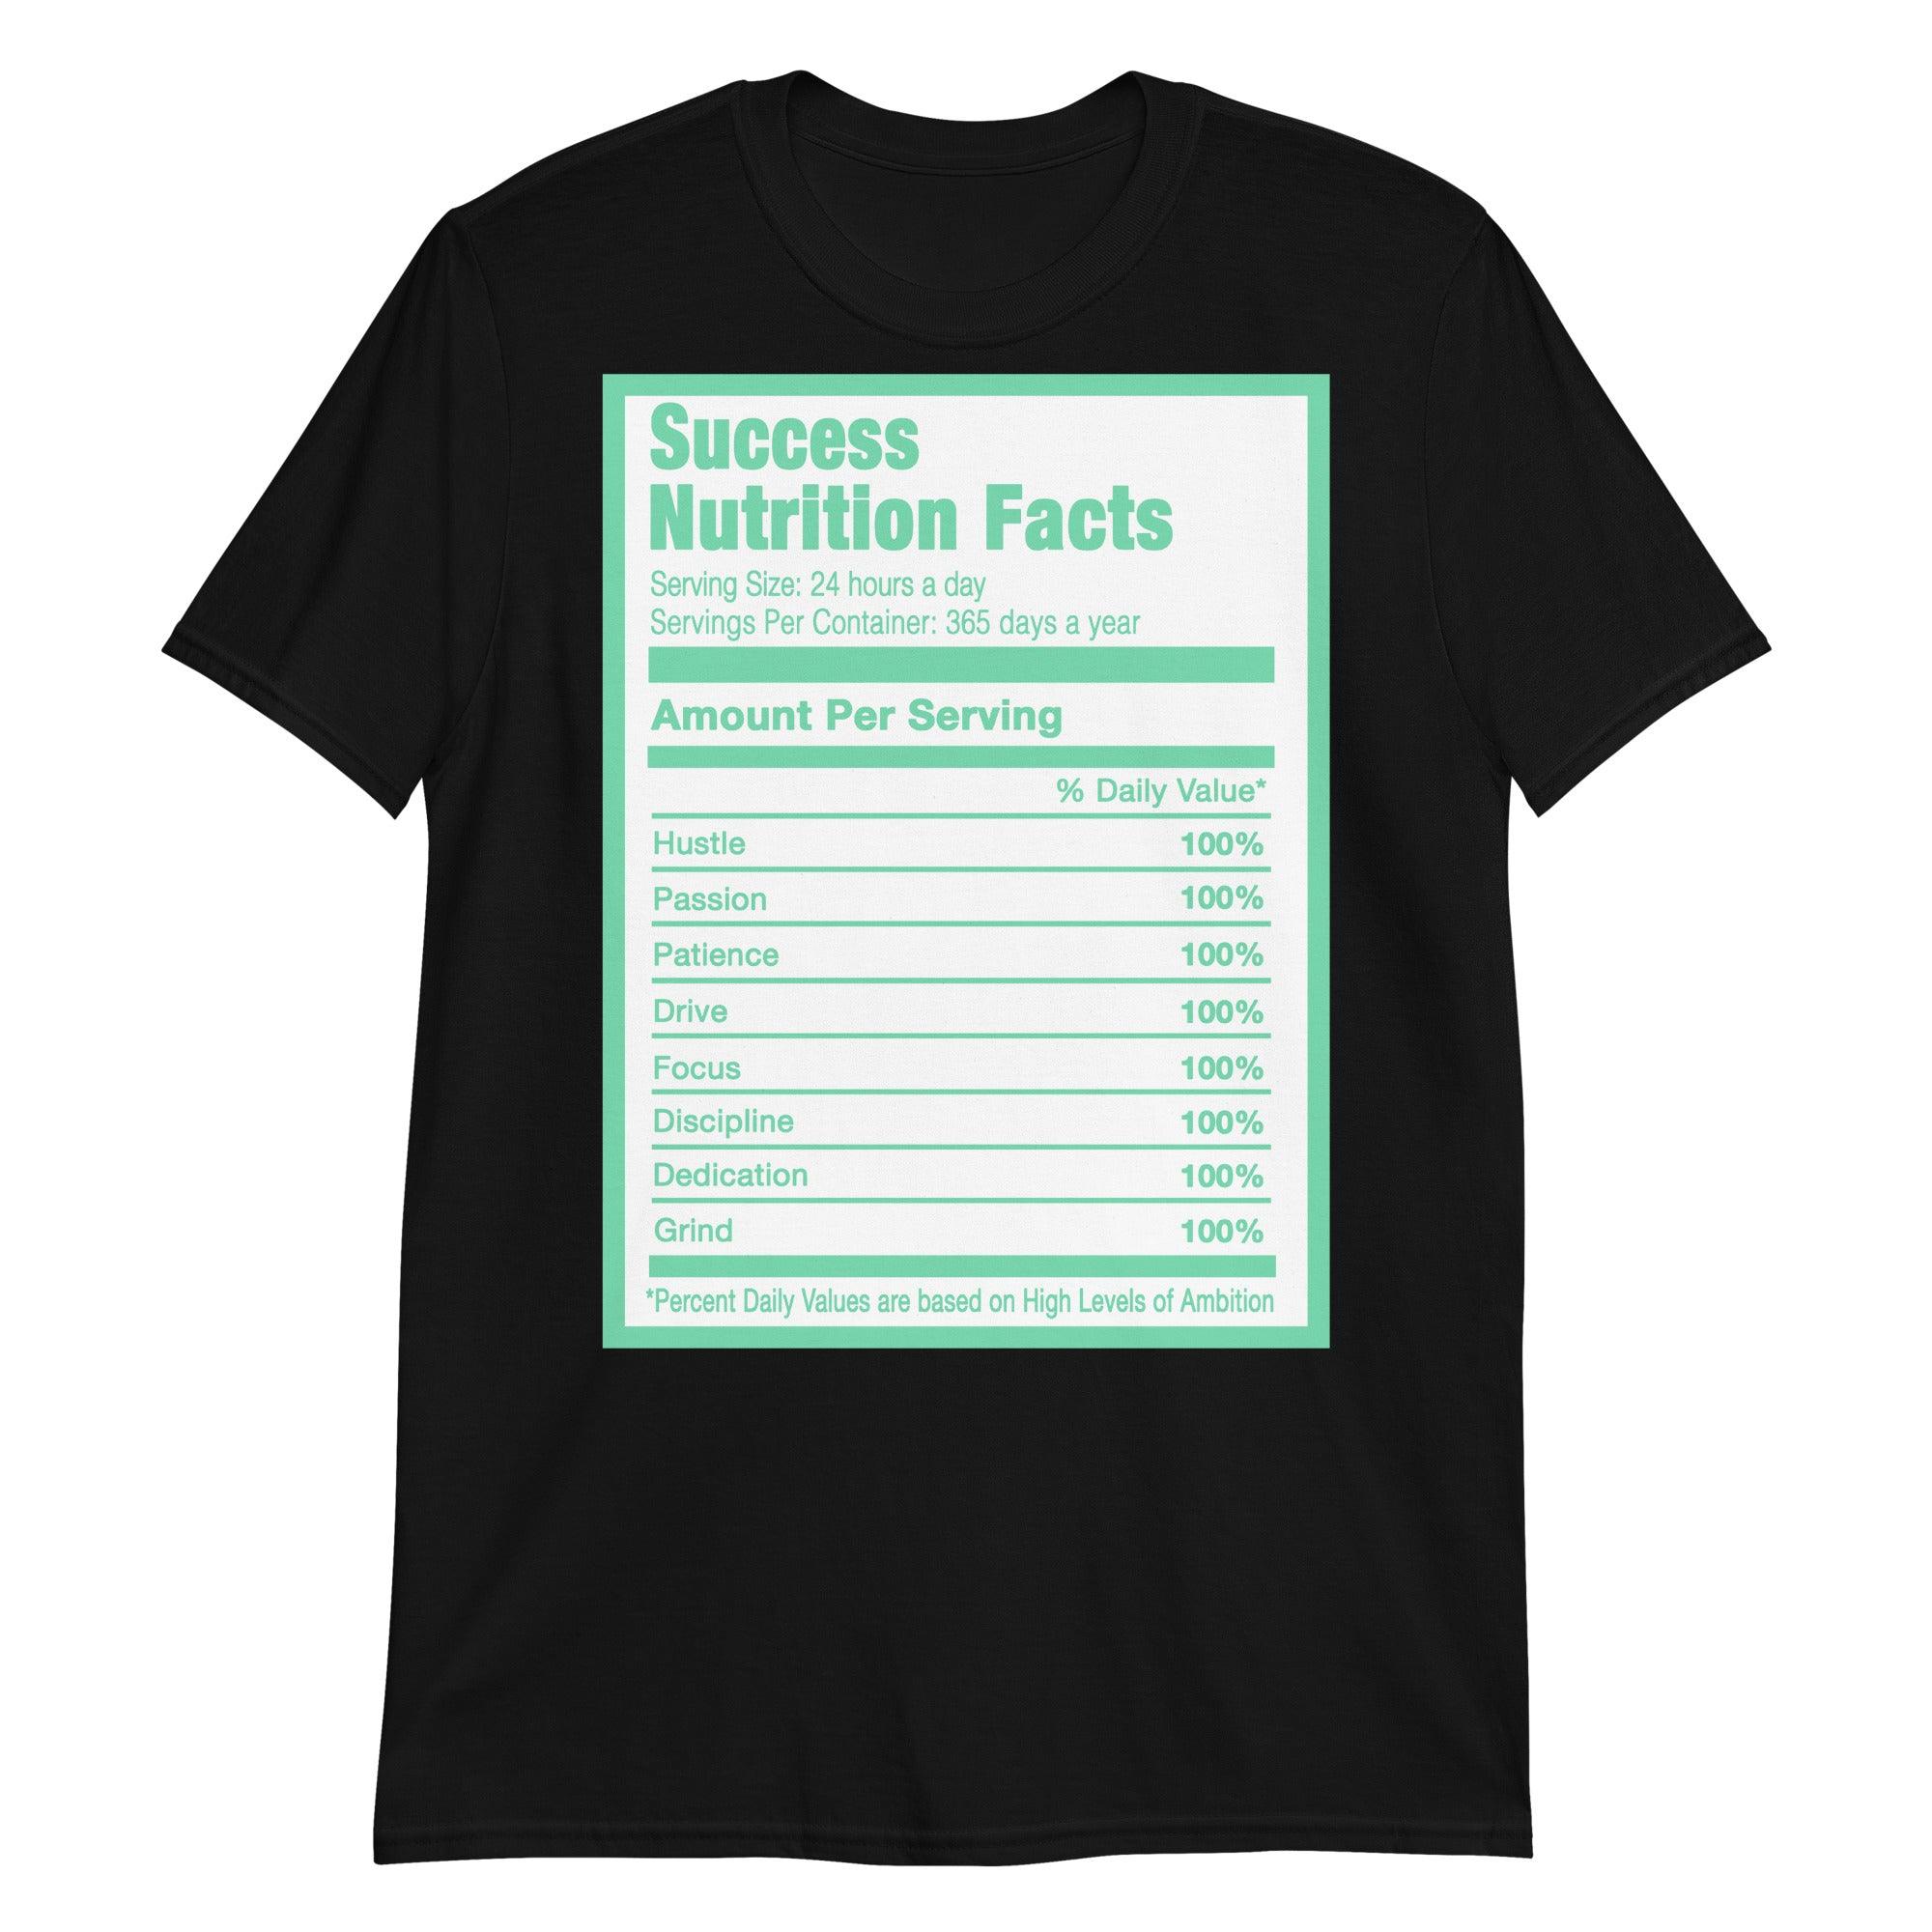 Success Nutrition Facts Shirt Nike Dunks Low Green Glow Sneakers photo